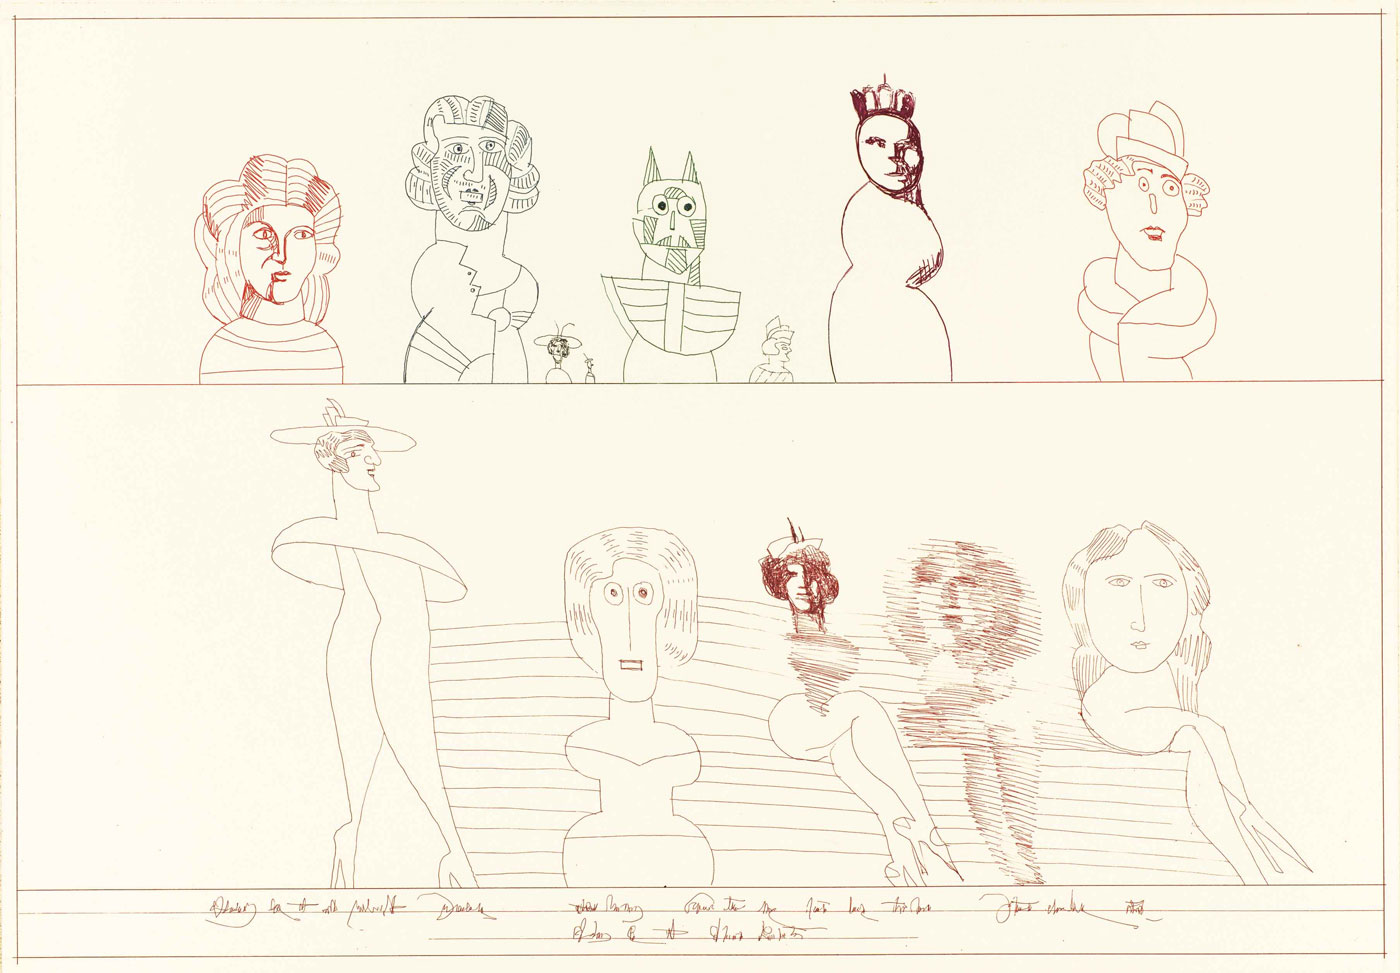 Ten Women, 1983/1996, etching on paper, color proof, 20 7/8 x 29 5/8 in. Published by Gemini G.E.L. Begun 1983, editioned 1996. 